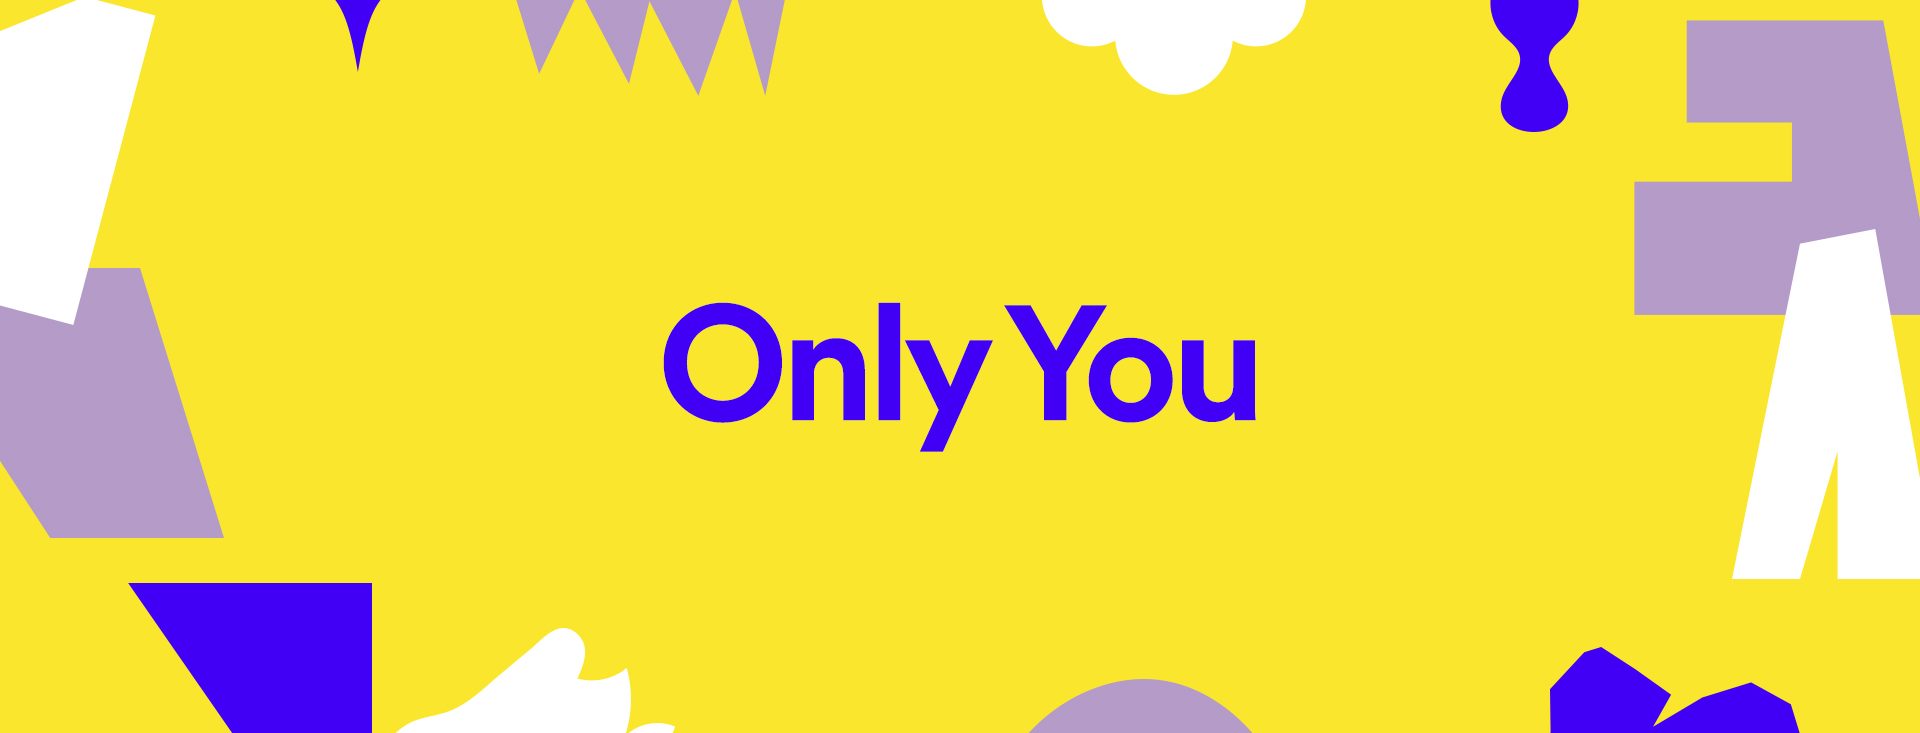 Celebrate Your Unique Listening Style With Spotify S Only You In App Experience Spotify